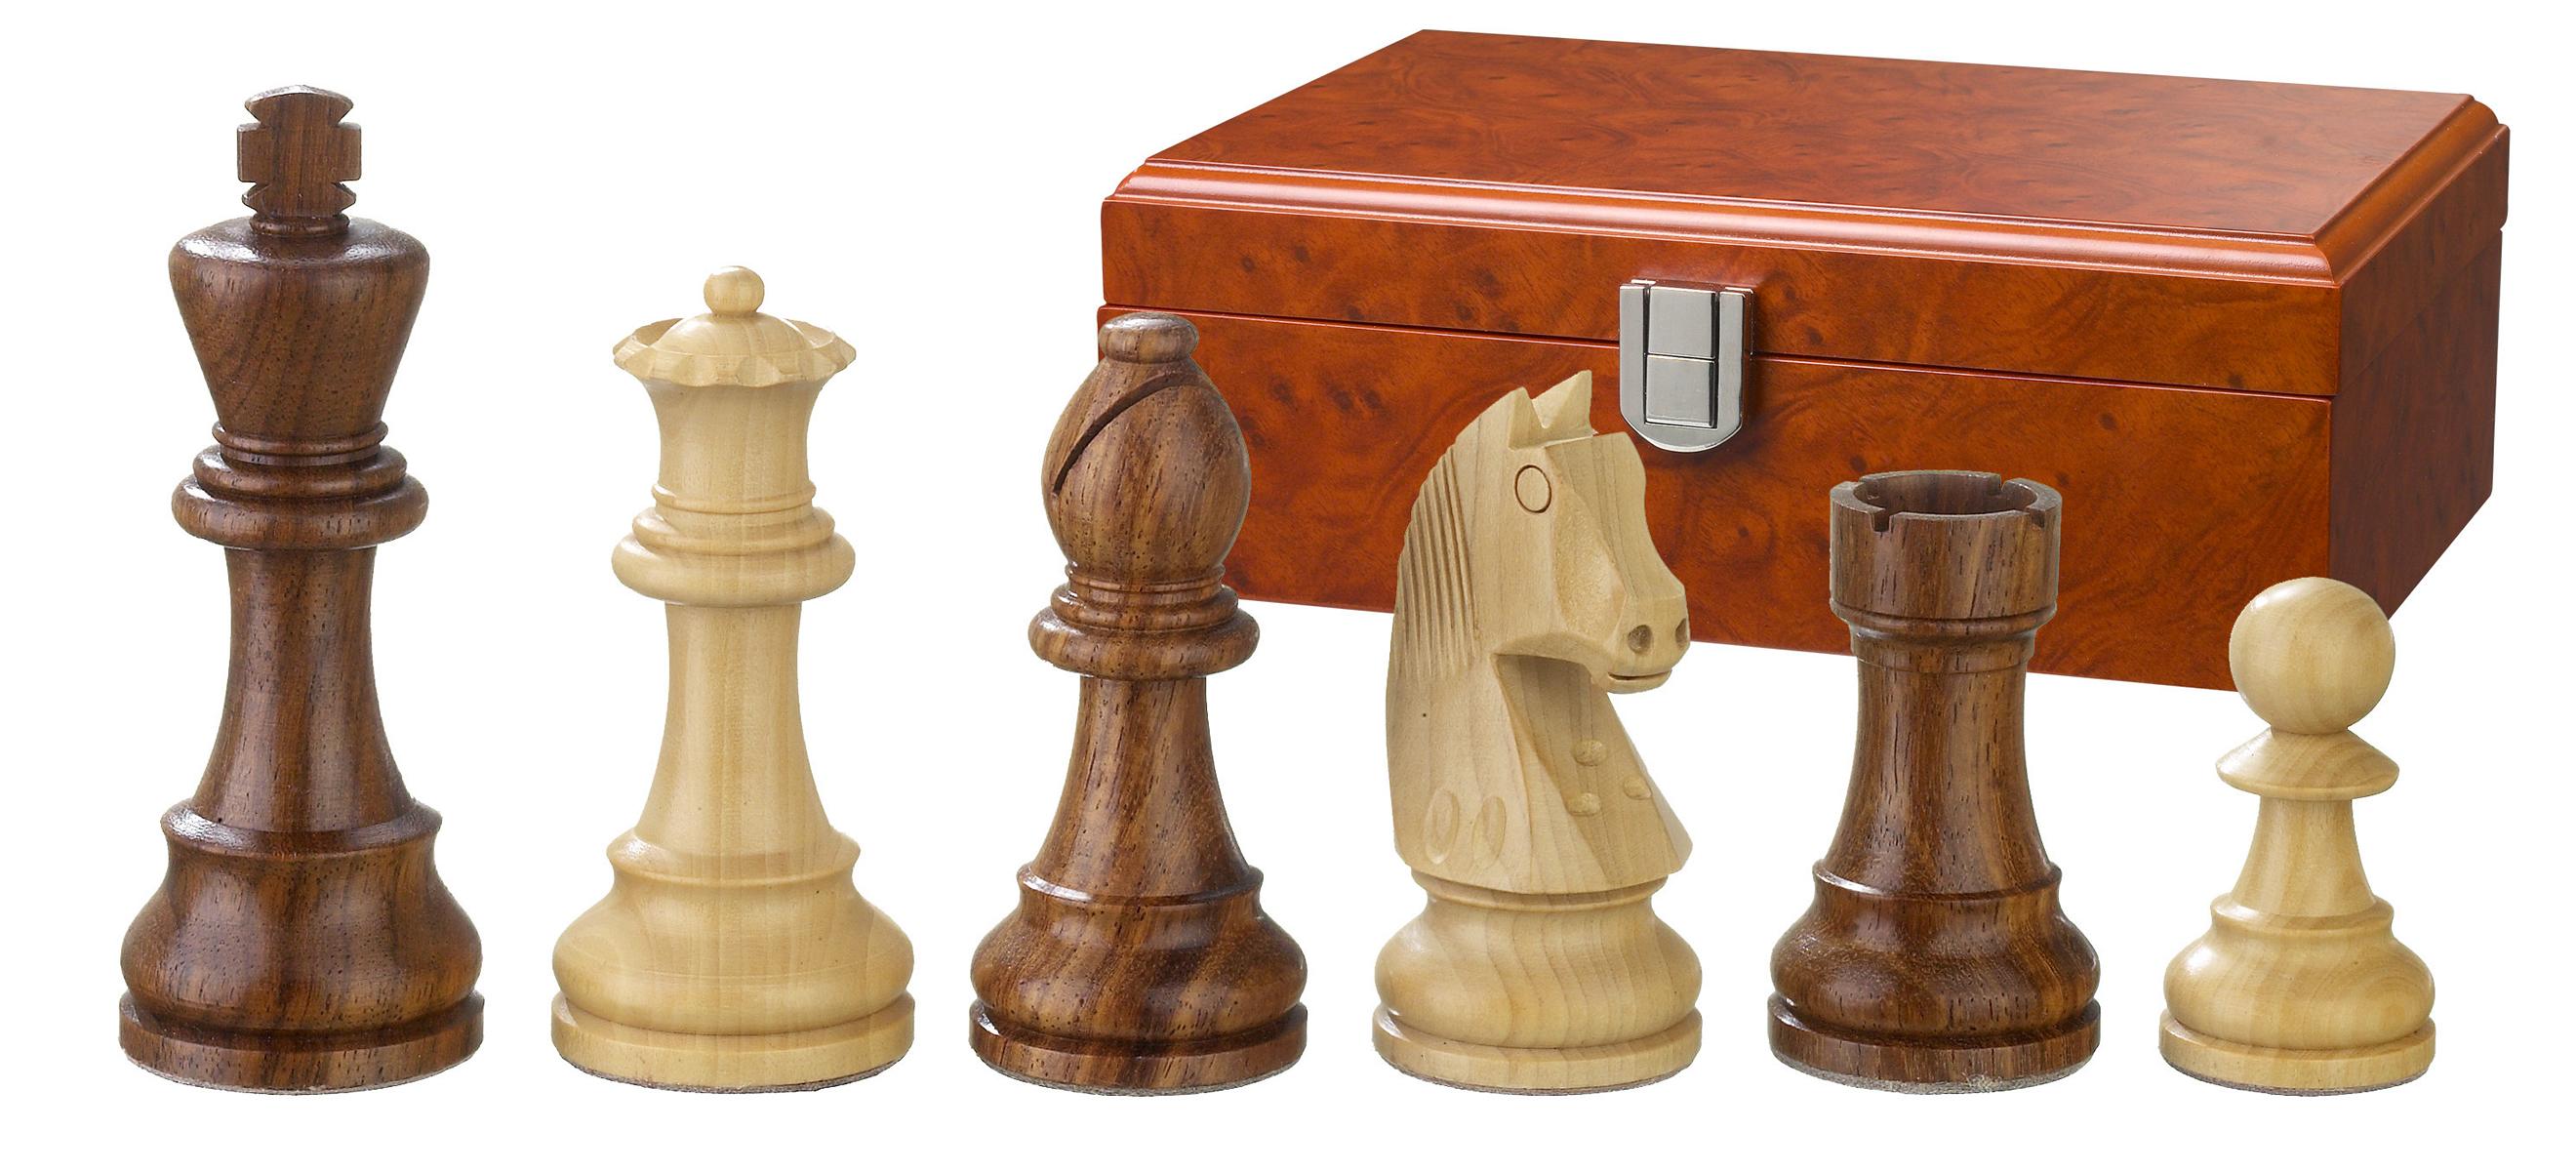 Chess pieces Artus, king height 95 mm, in wooden box